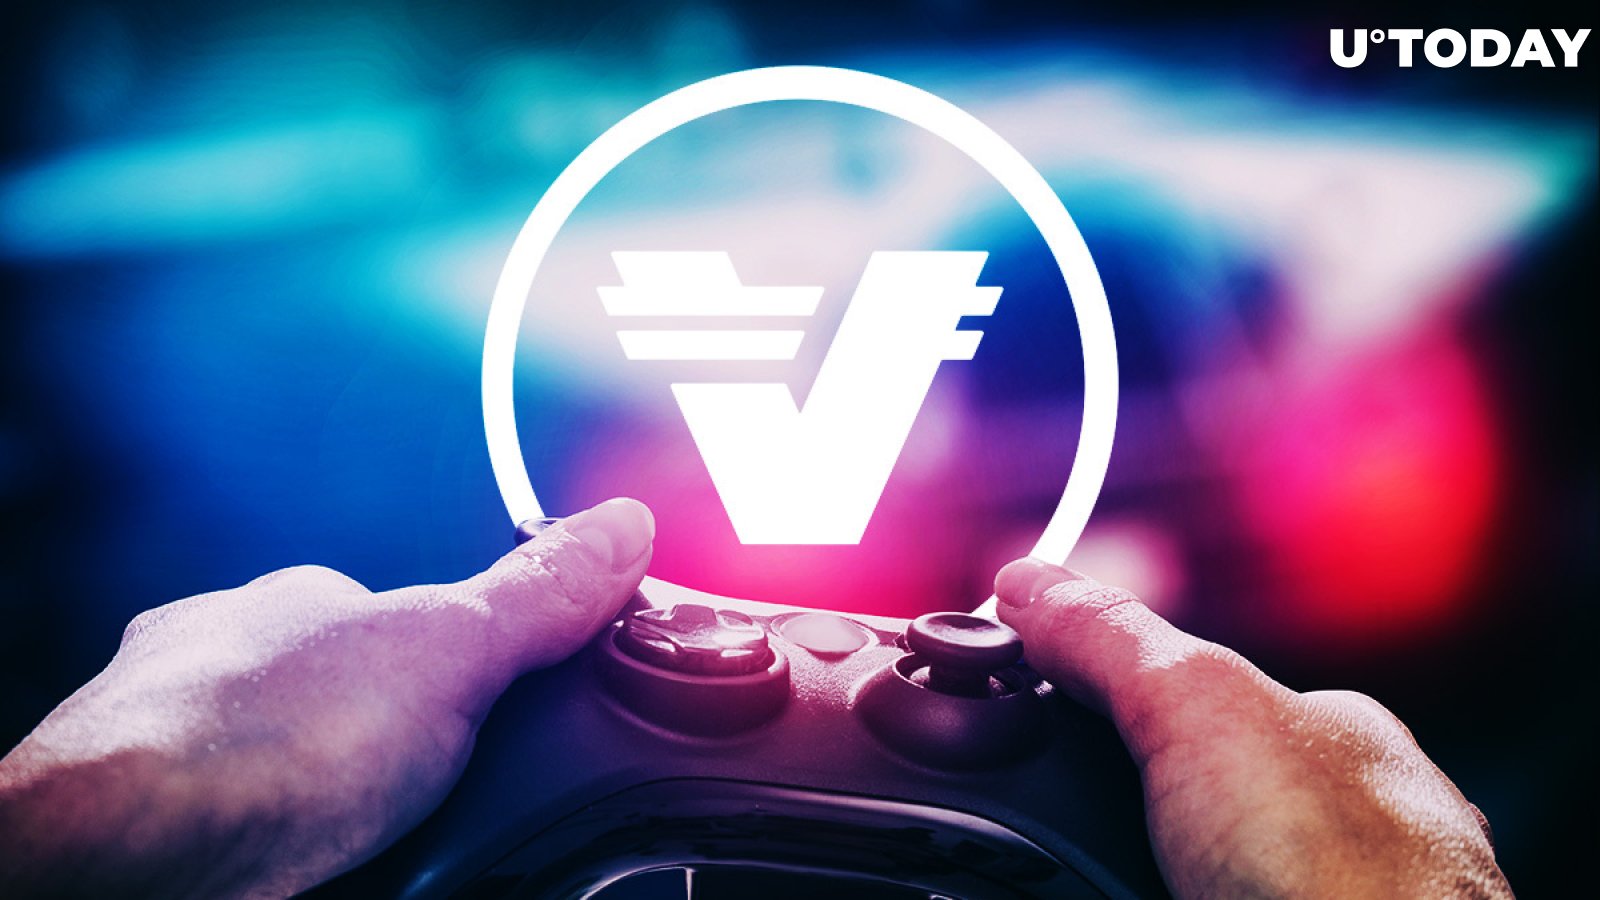 Verasity Launches Game Store and Video Platform: What's New